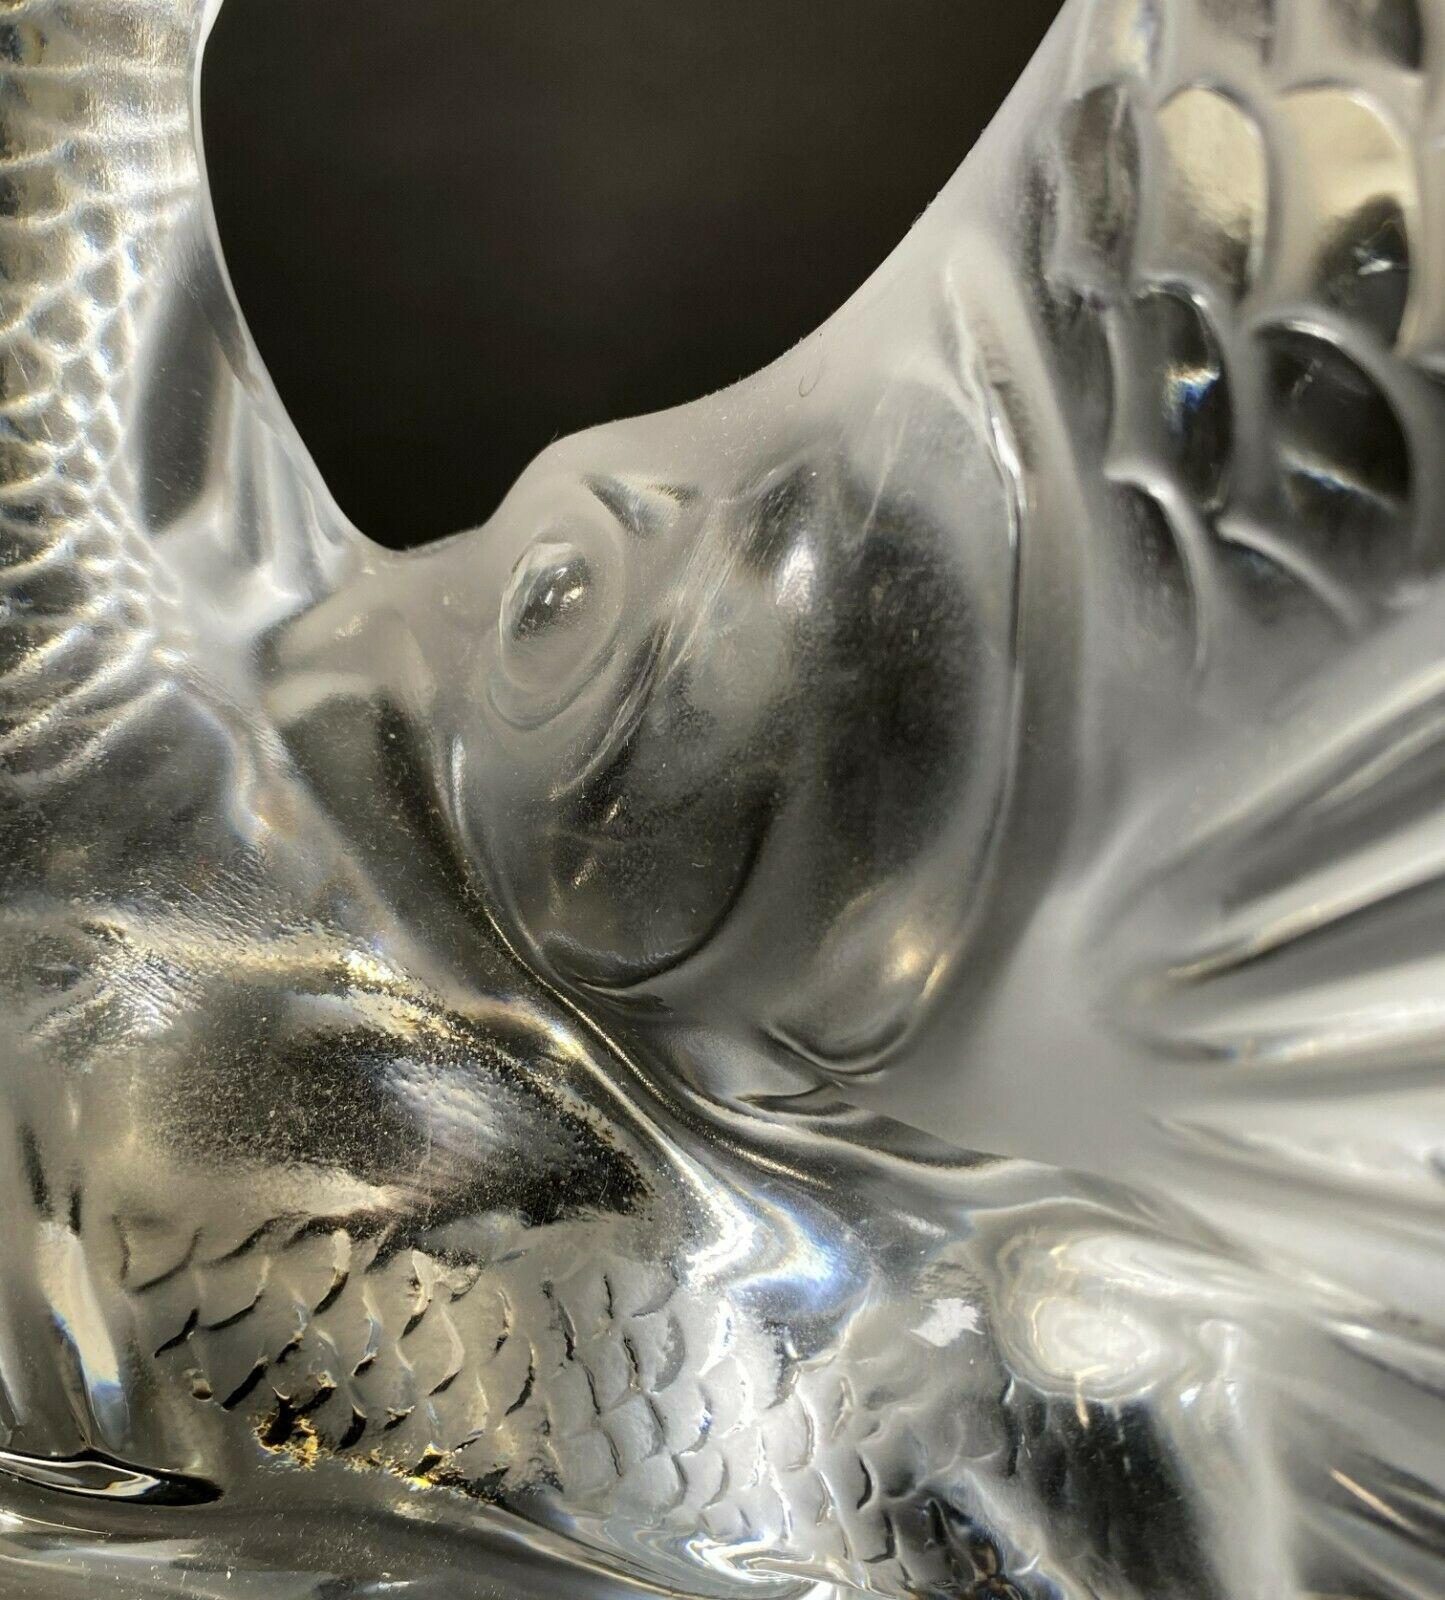 For your consideration is a stunning, Lalique, crystal glass table sculpture of double koi fish. Measures: 11.5